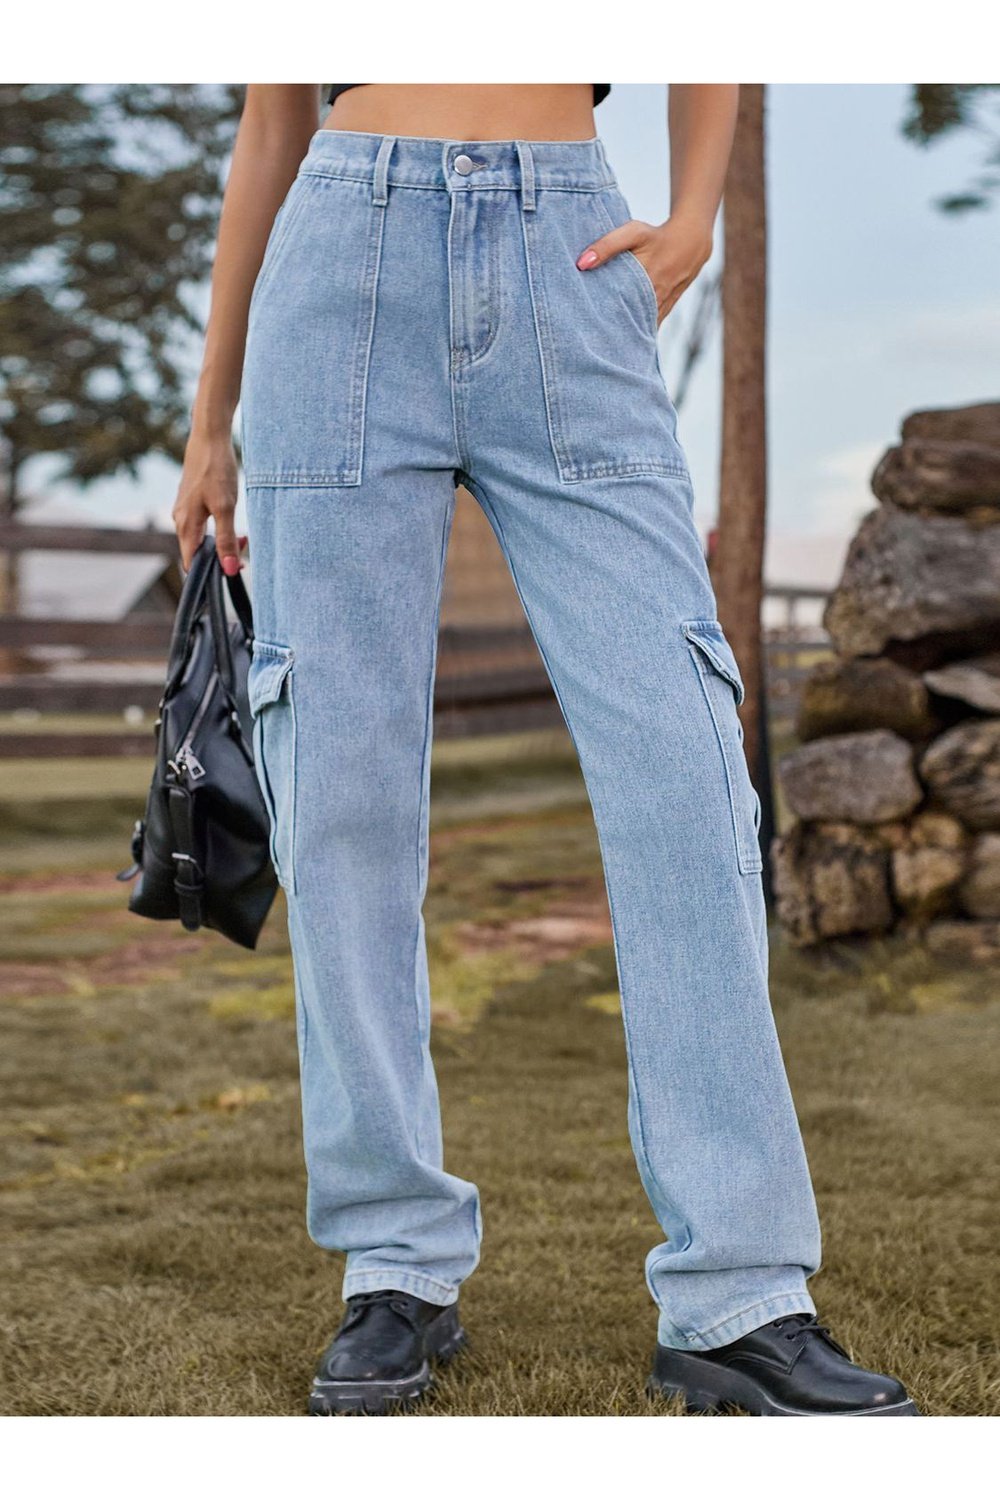 High Waist Cargo Jeans - Jeans - FITGGINS